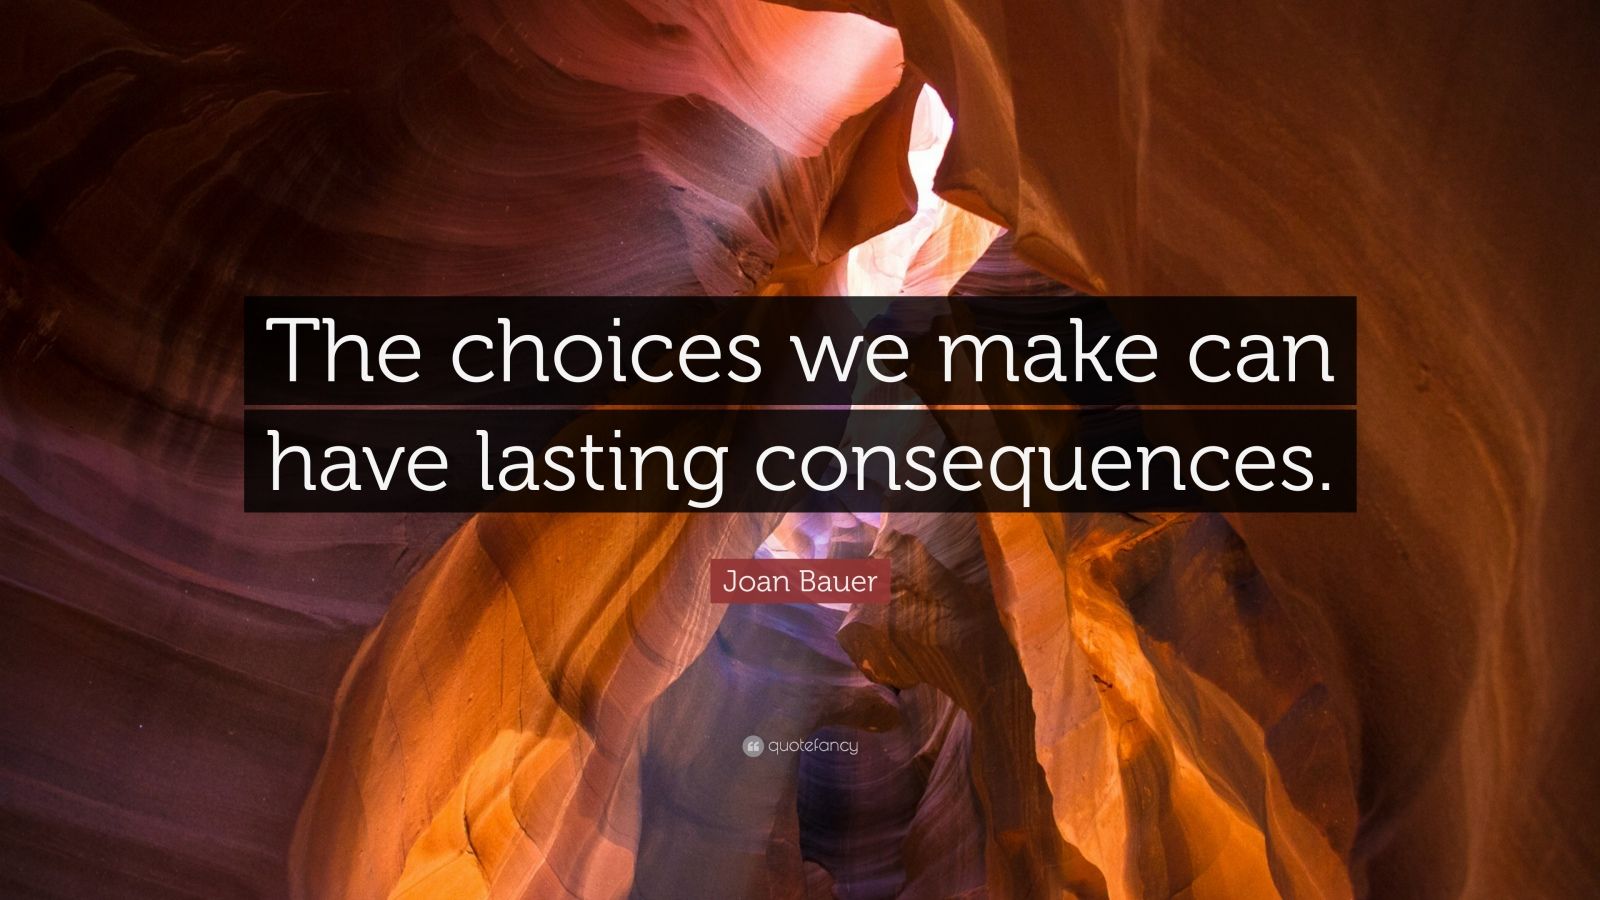 Joan Bauer Quote “the Choices We Make Can Have Lasting Consequences